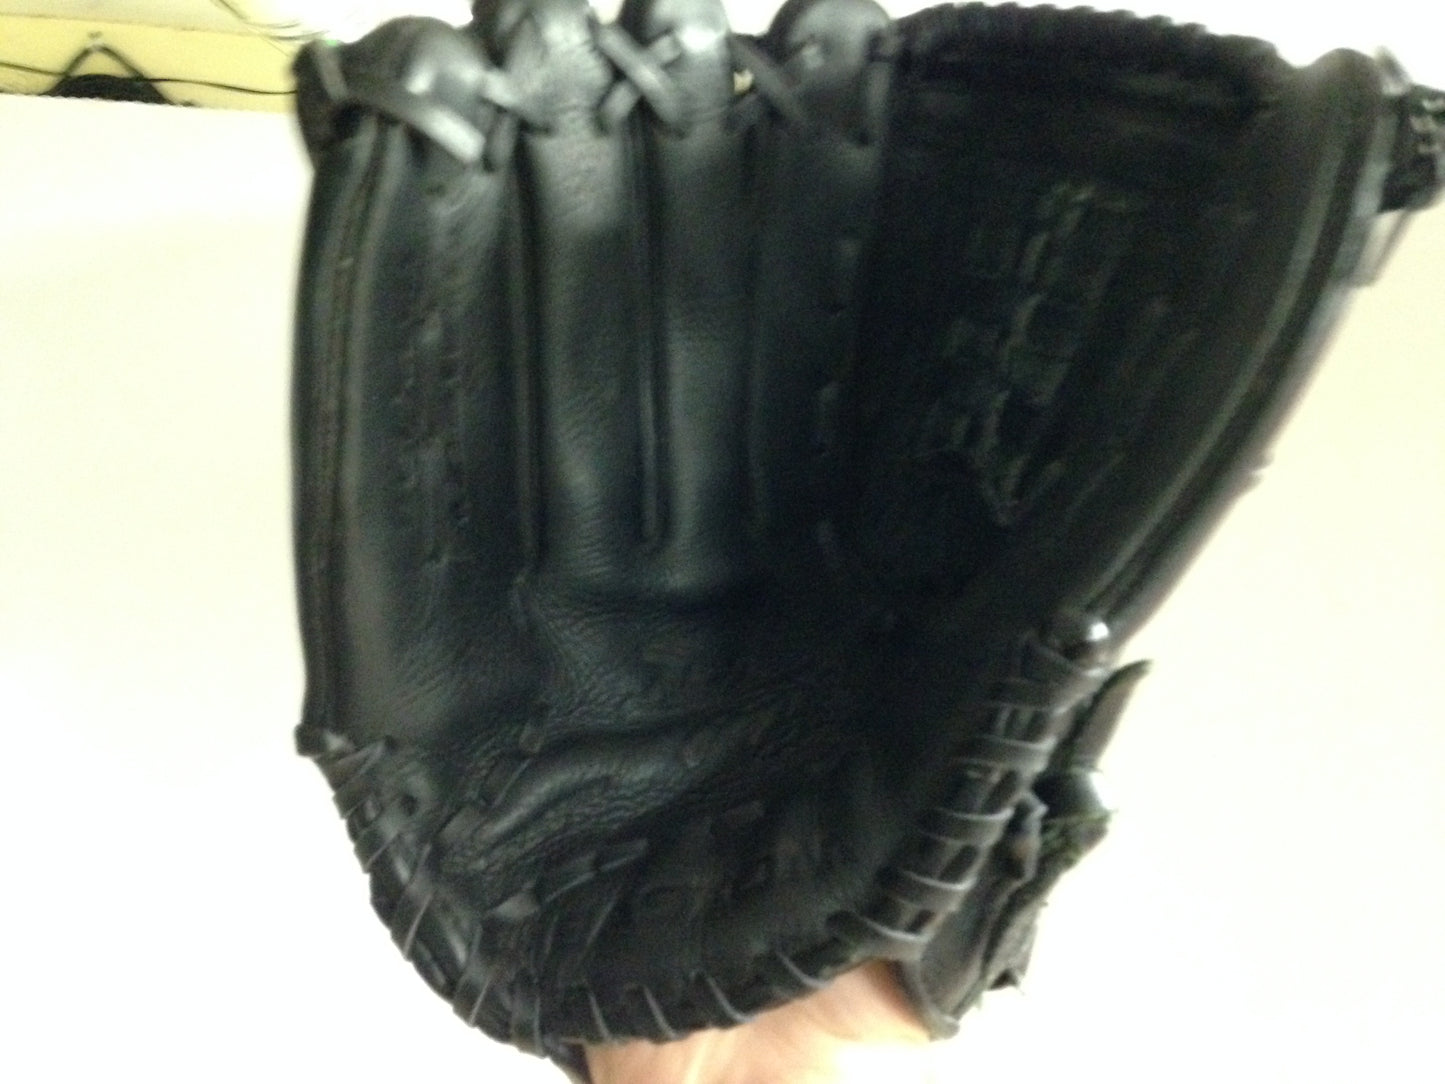 Baseball Glove Adult Size 13 inch Easton Black Leather Fits on RIGHT Hand Excellent